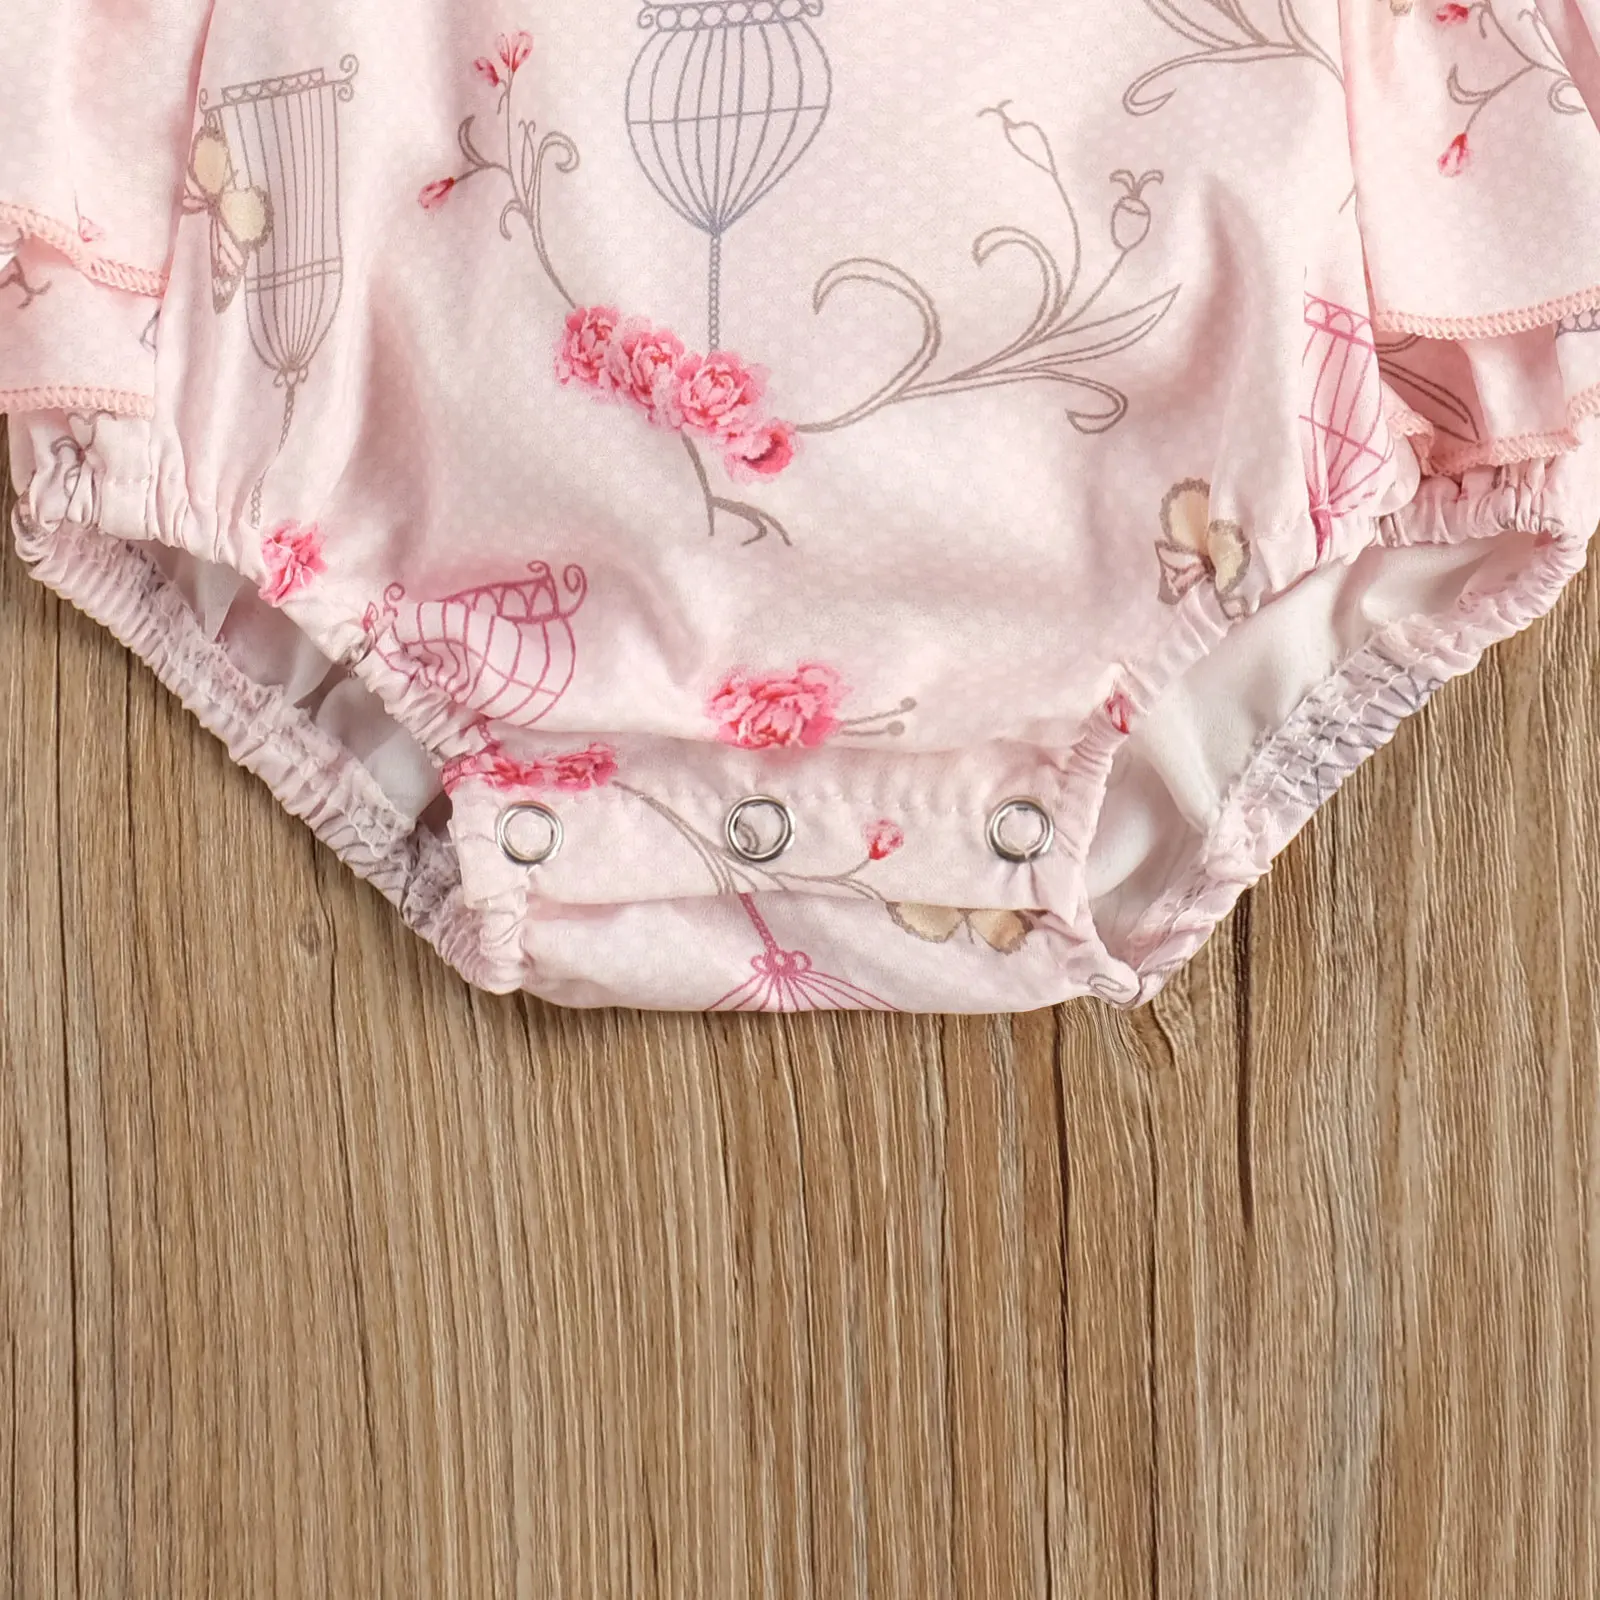 customised baby bodysuits Ma&Baby 3pcs/pack Newborn Infant Baby Girls Rompers Cute Overalls Ruffles Donuts Flower Print Jumpsuit 3 pieces 0-24M DD43 cool baby bodysuits	